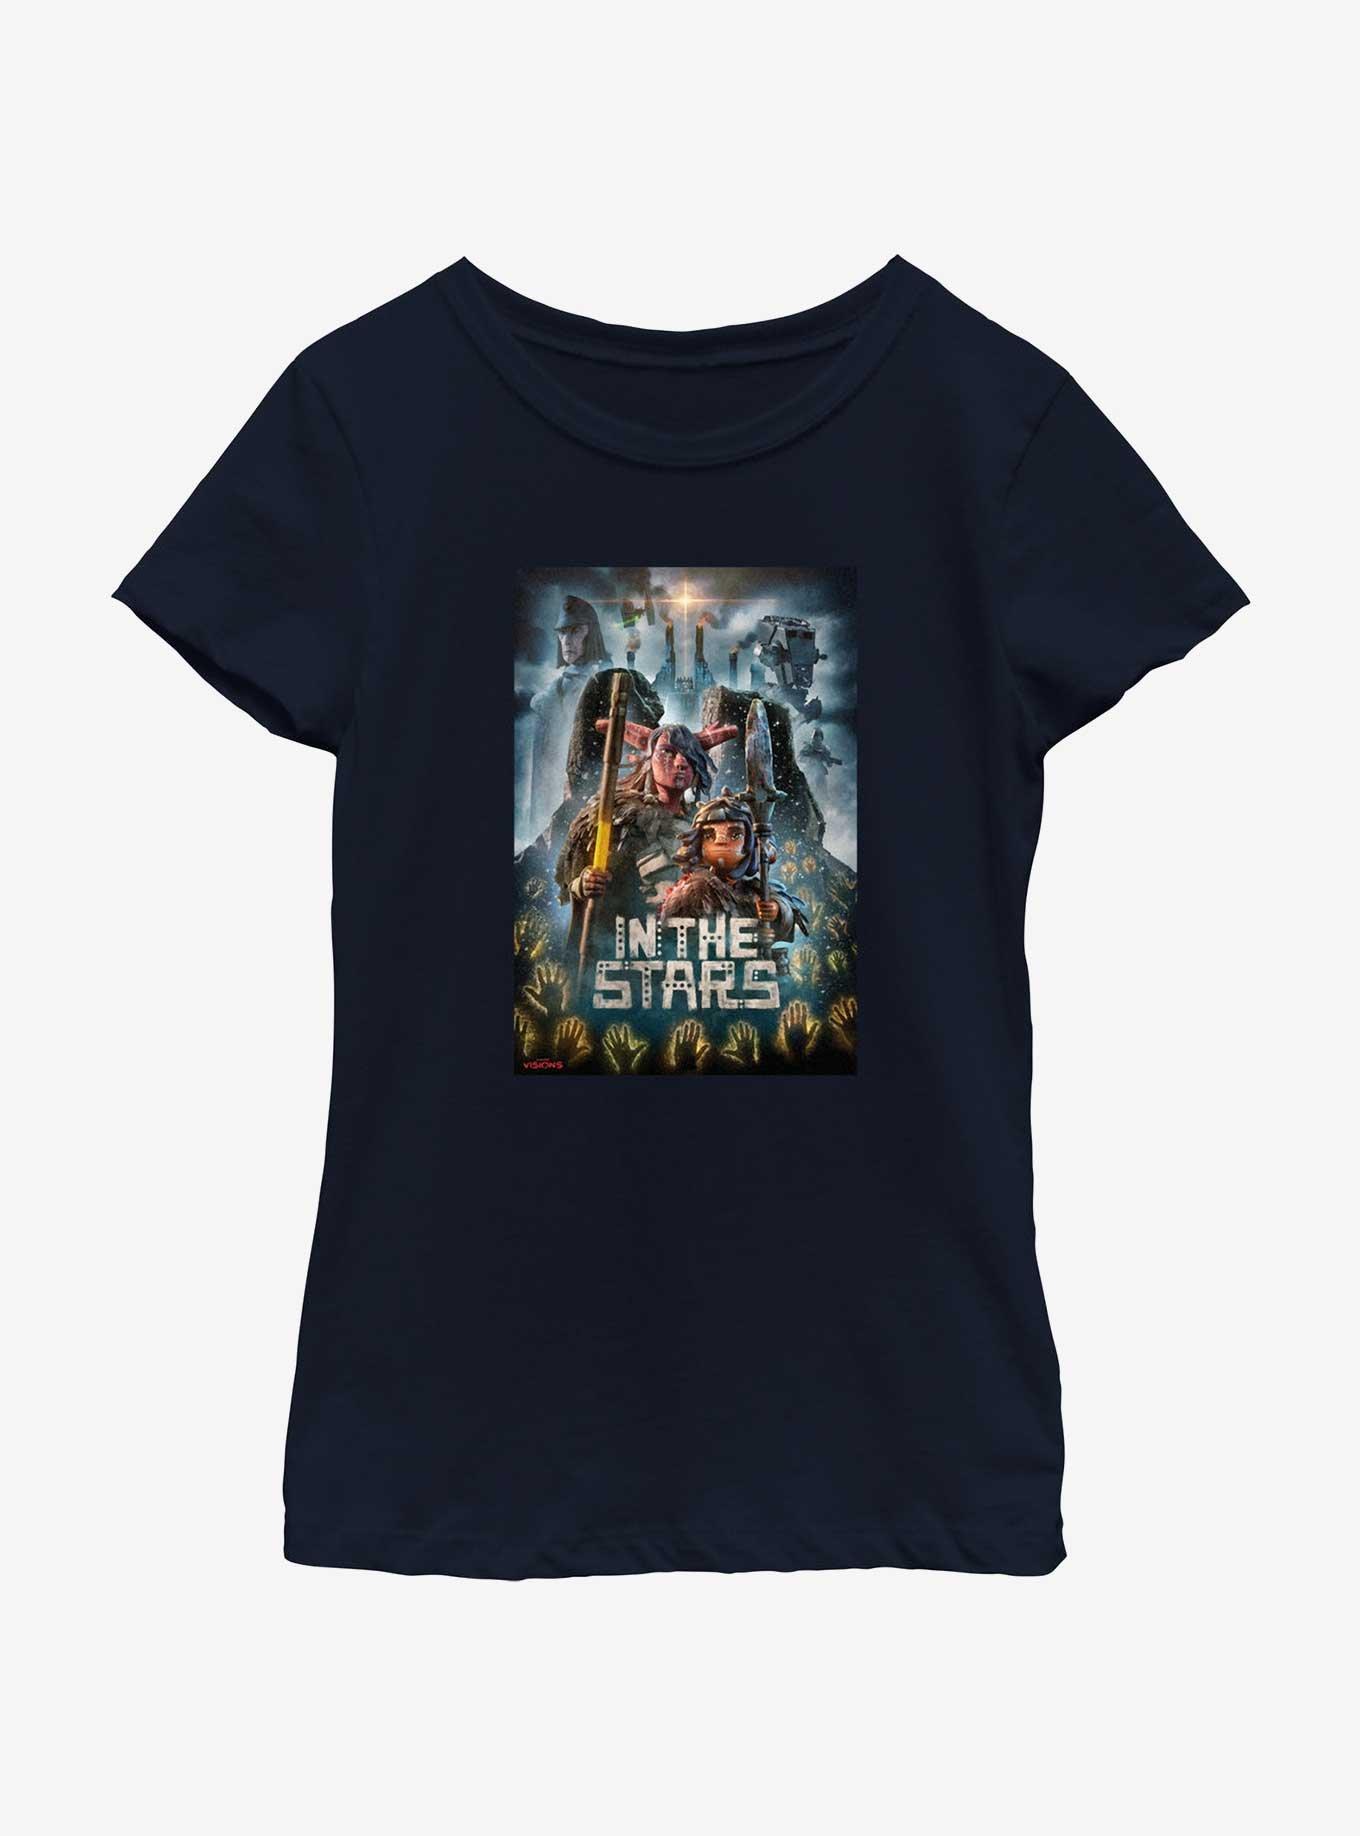 Star Wars: Visions In The Stars Poster Youth Girls T-Shirt, NAVY, hi-res